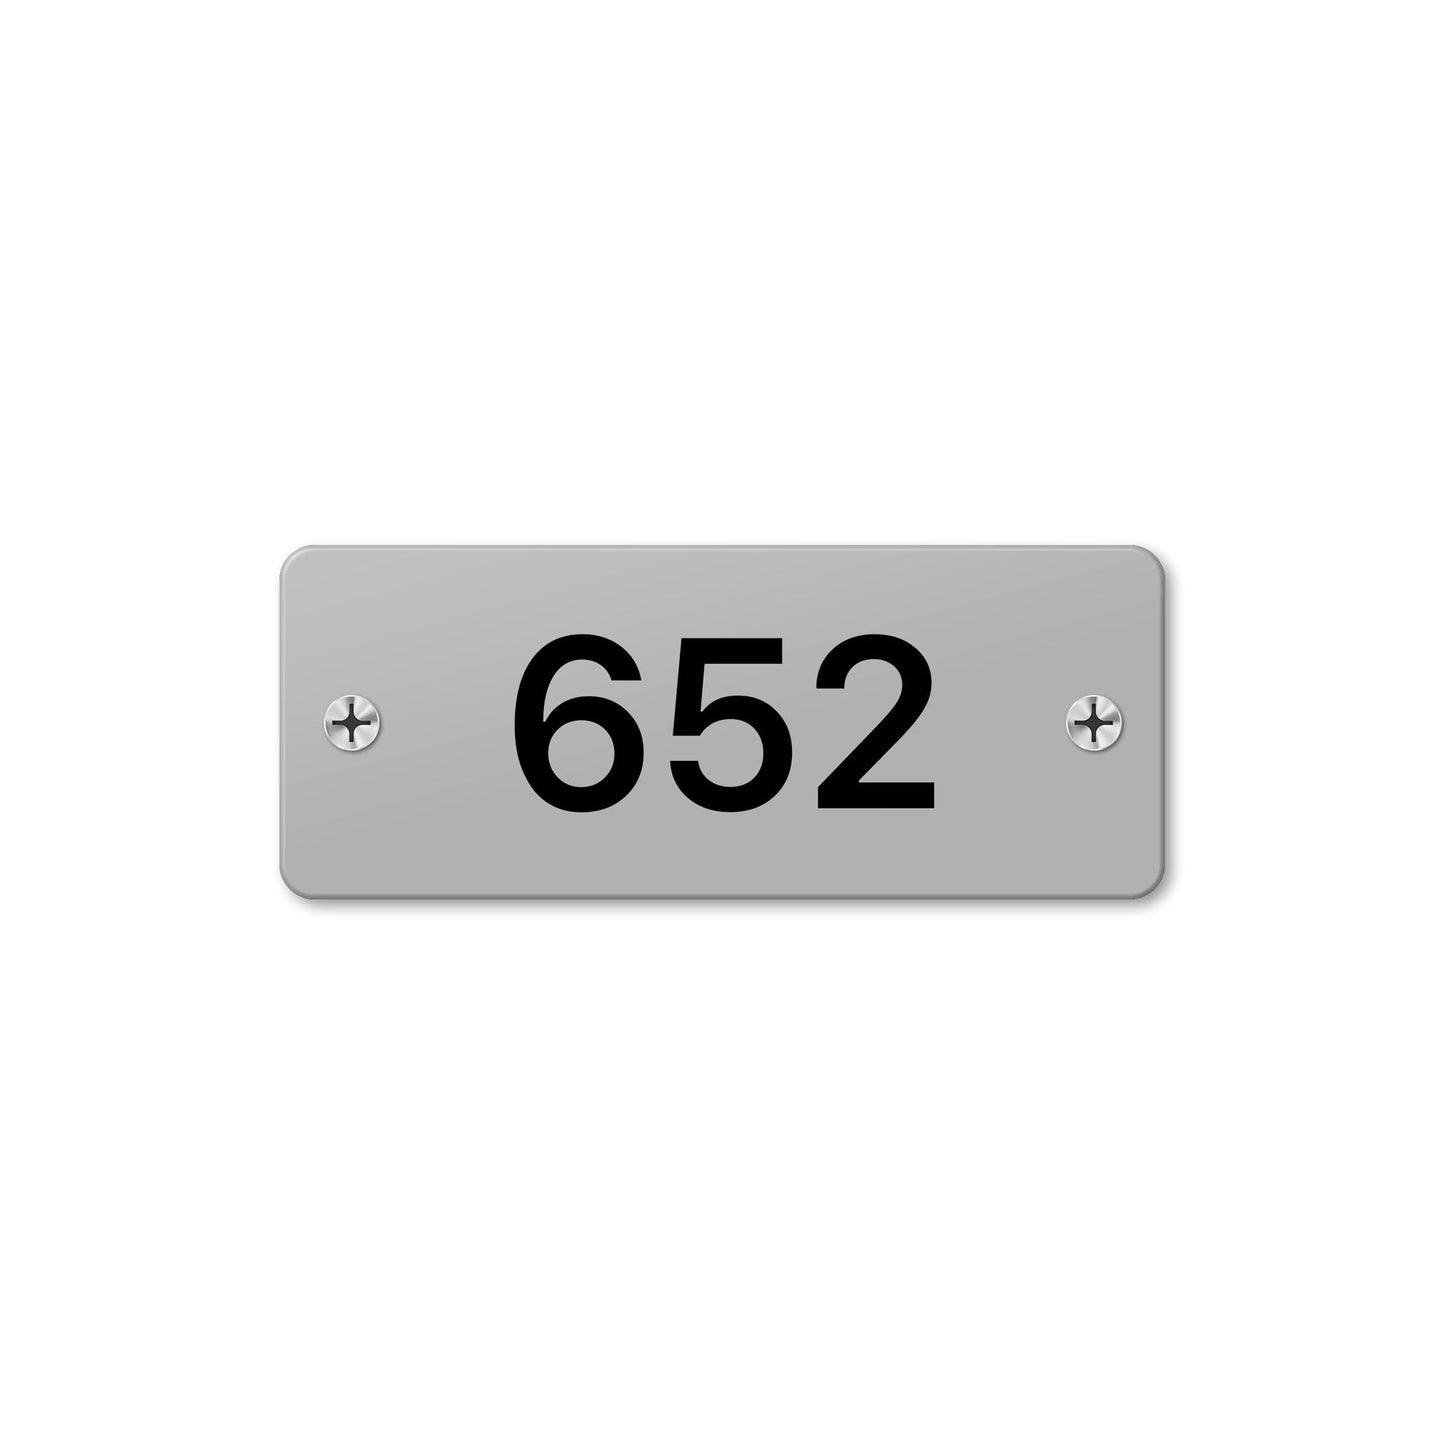 Numeral 652